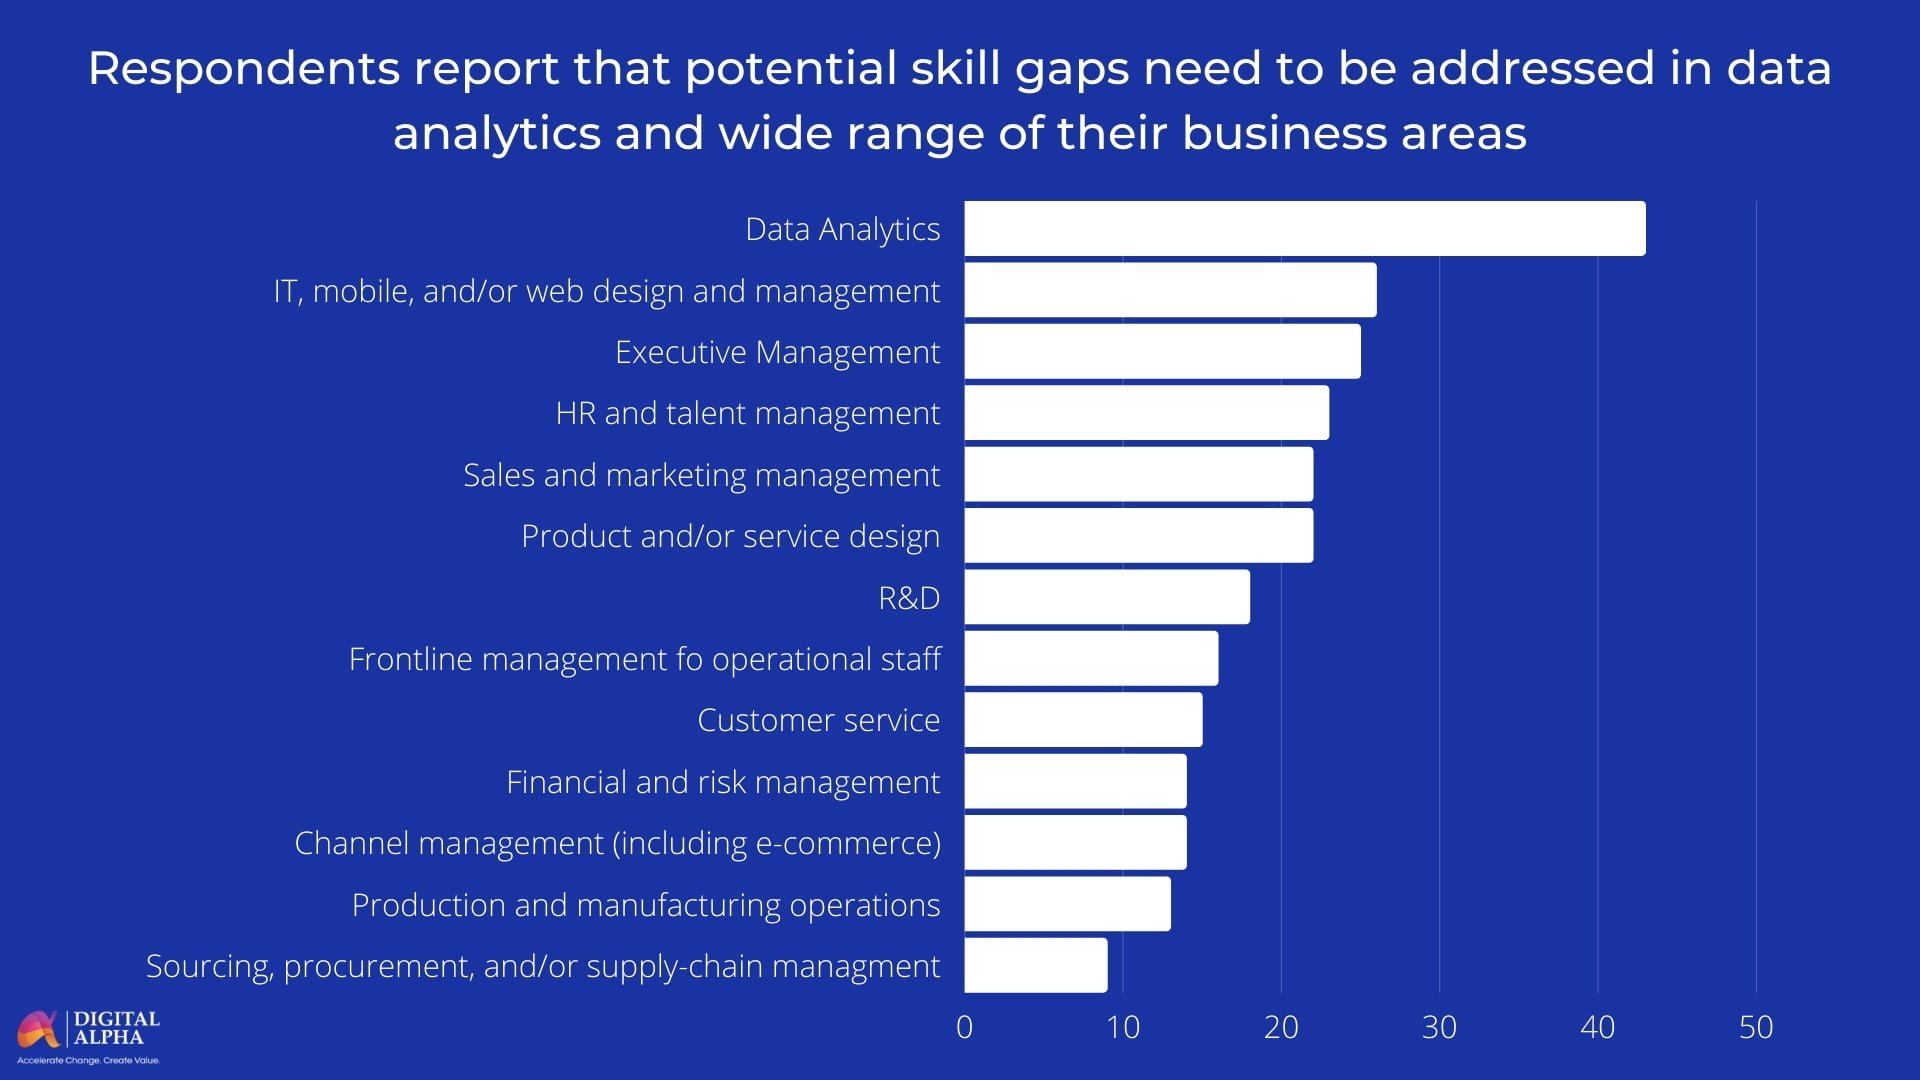 Business areas with the greatest need to address the potential skills gap, percentage (%) of respondents